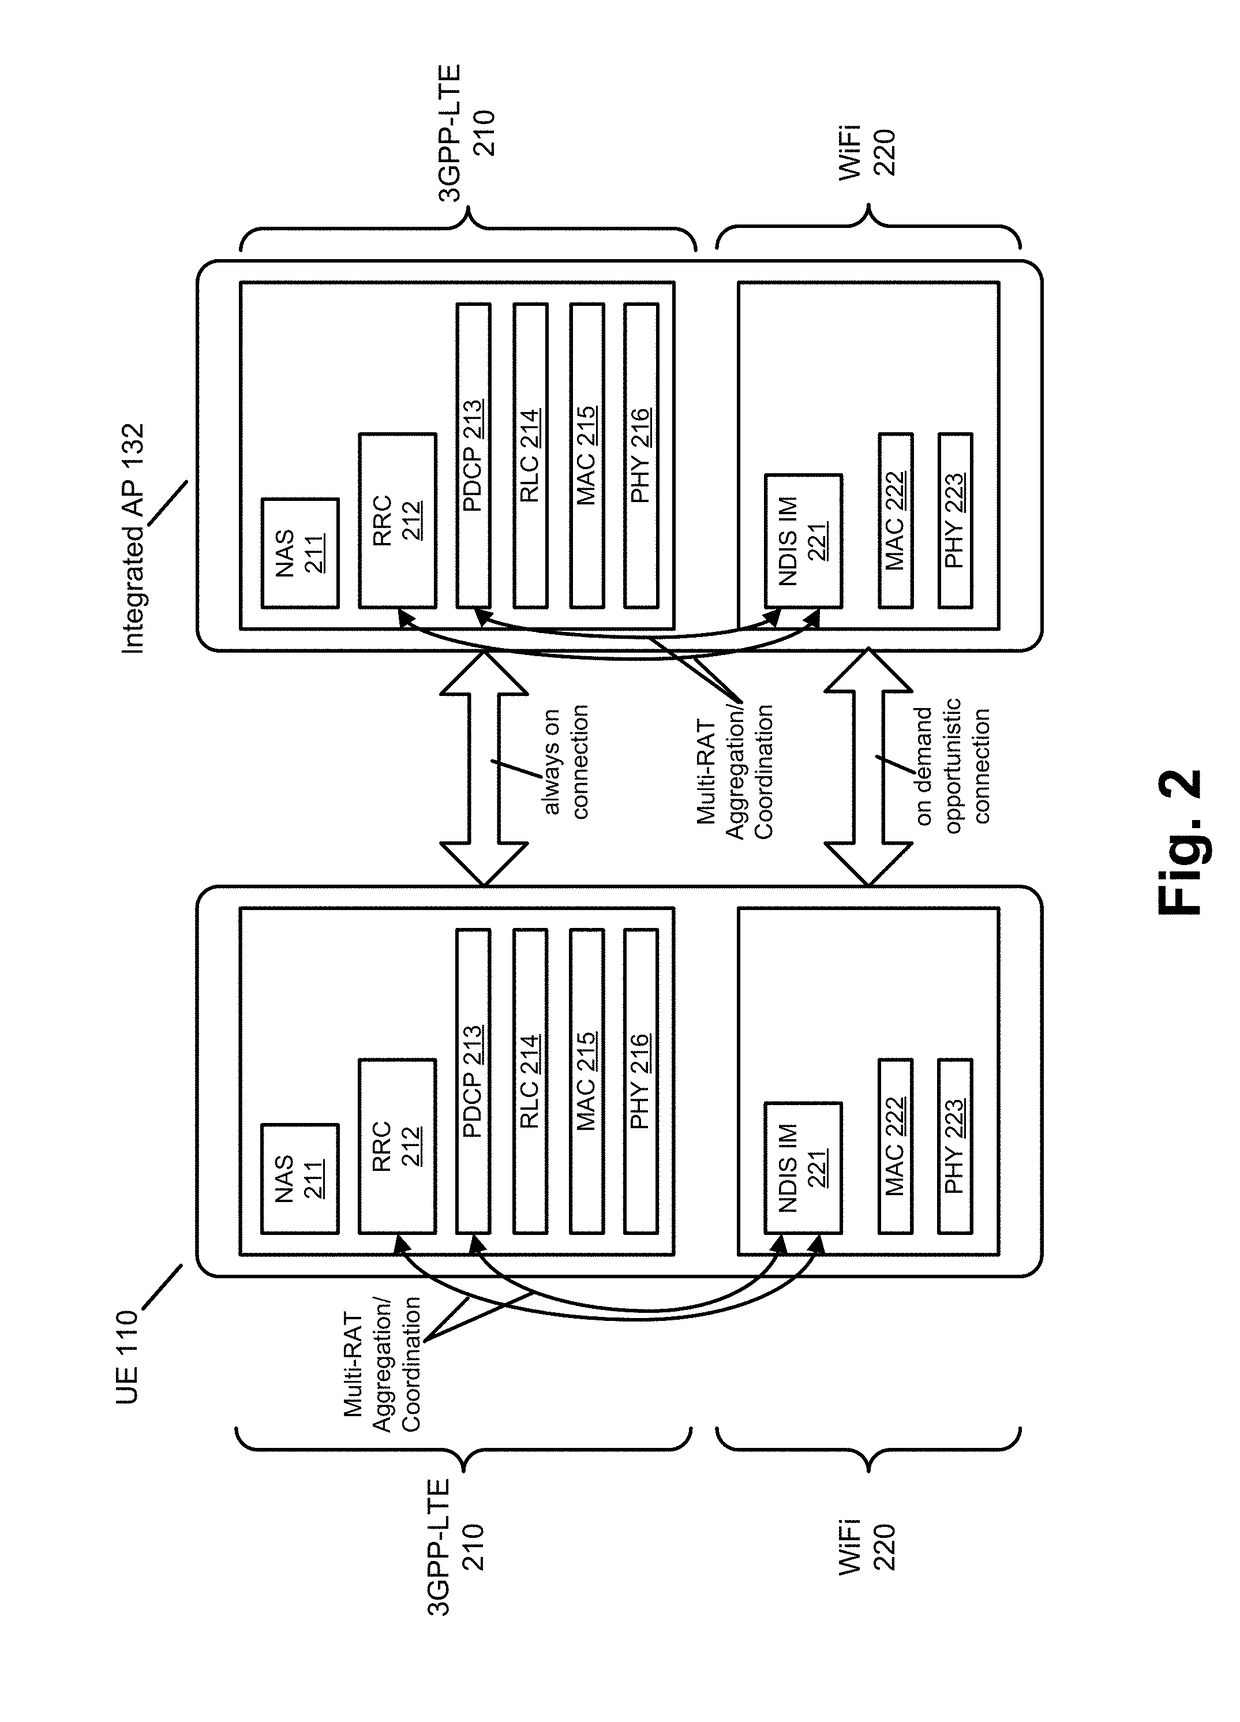 In-band control signaling for integrated WLAN/3GPP RAT architectures